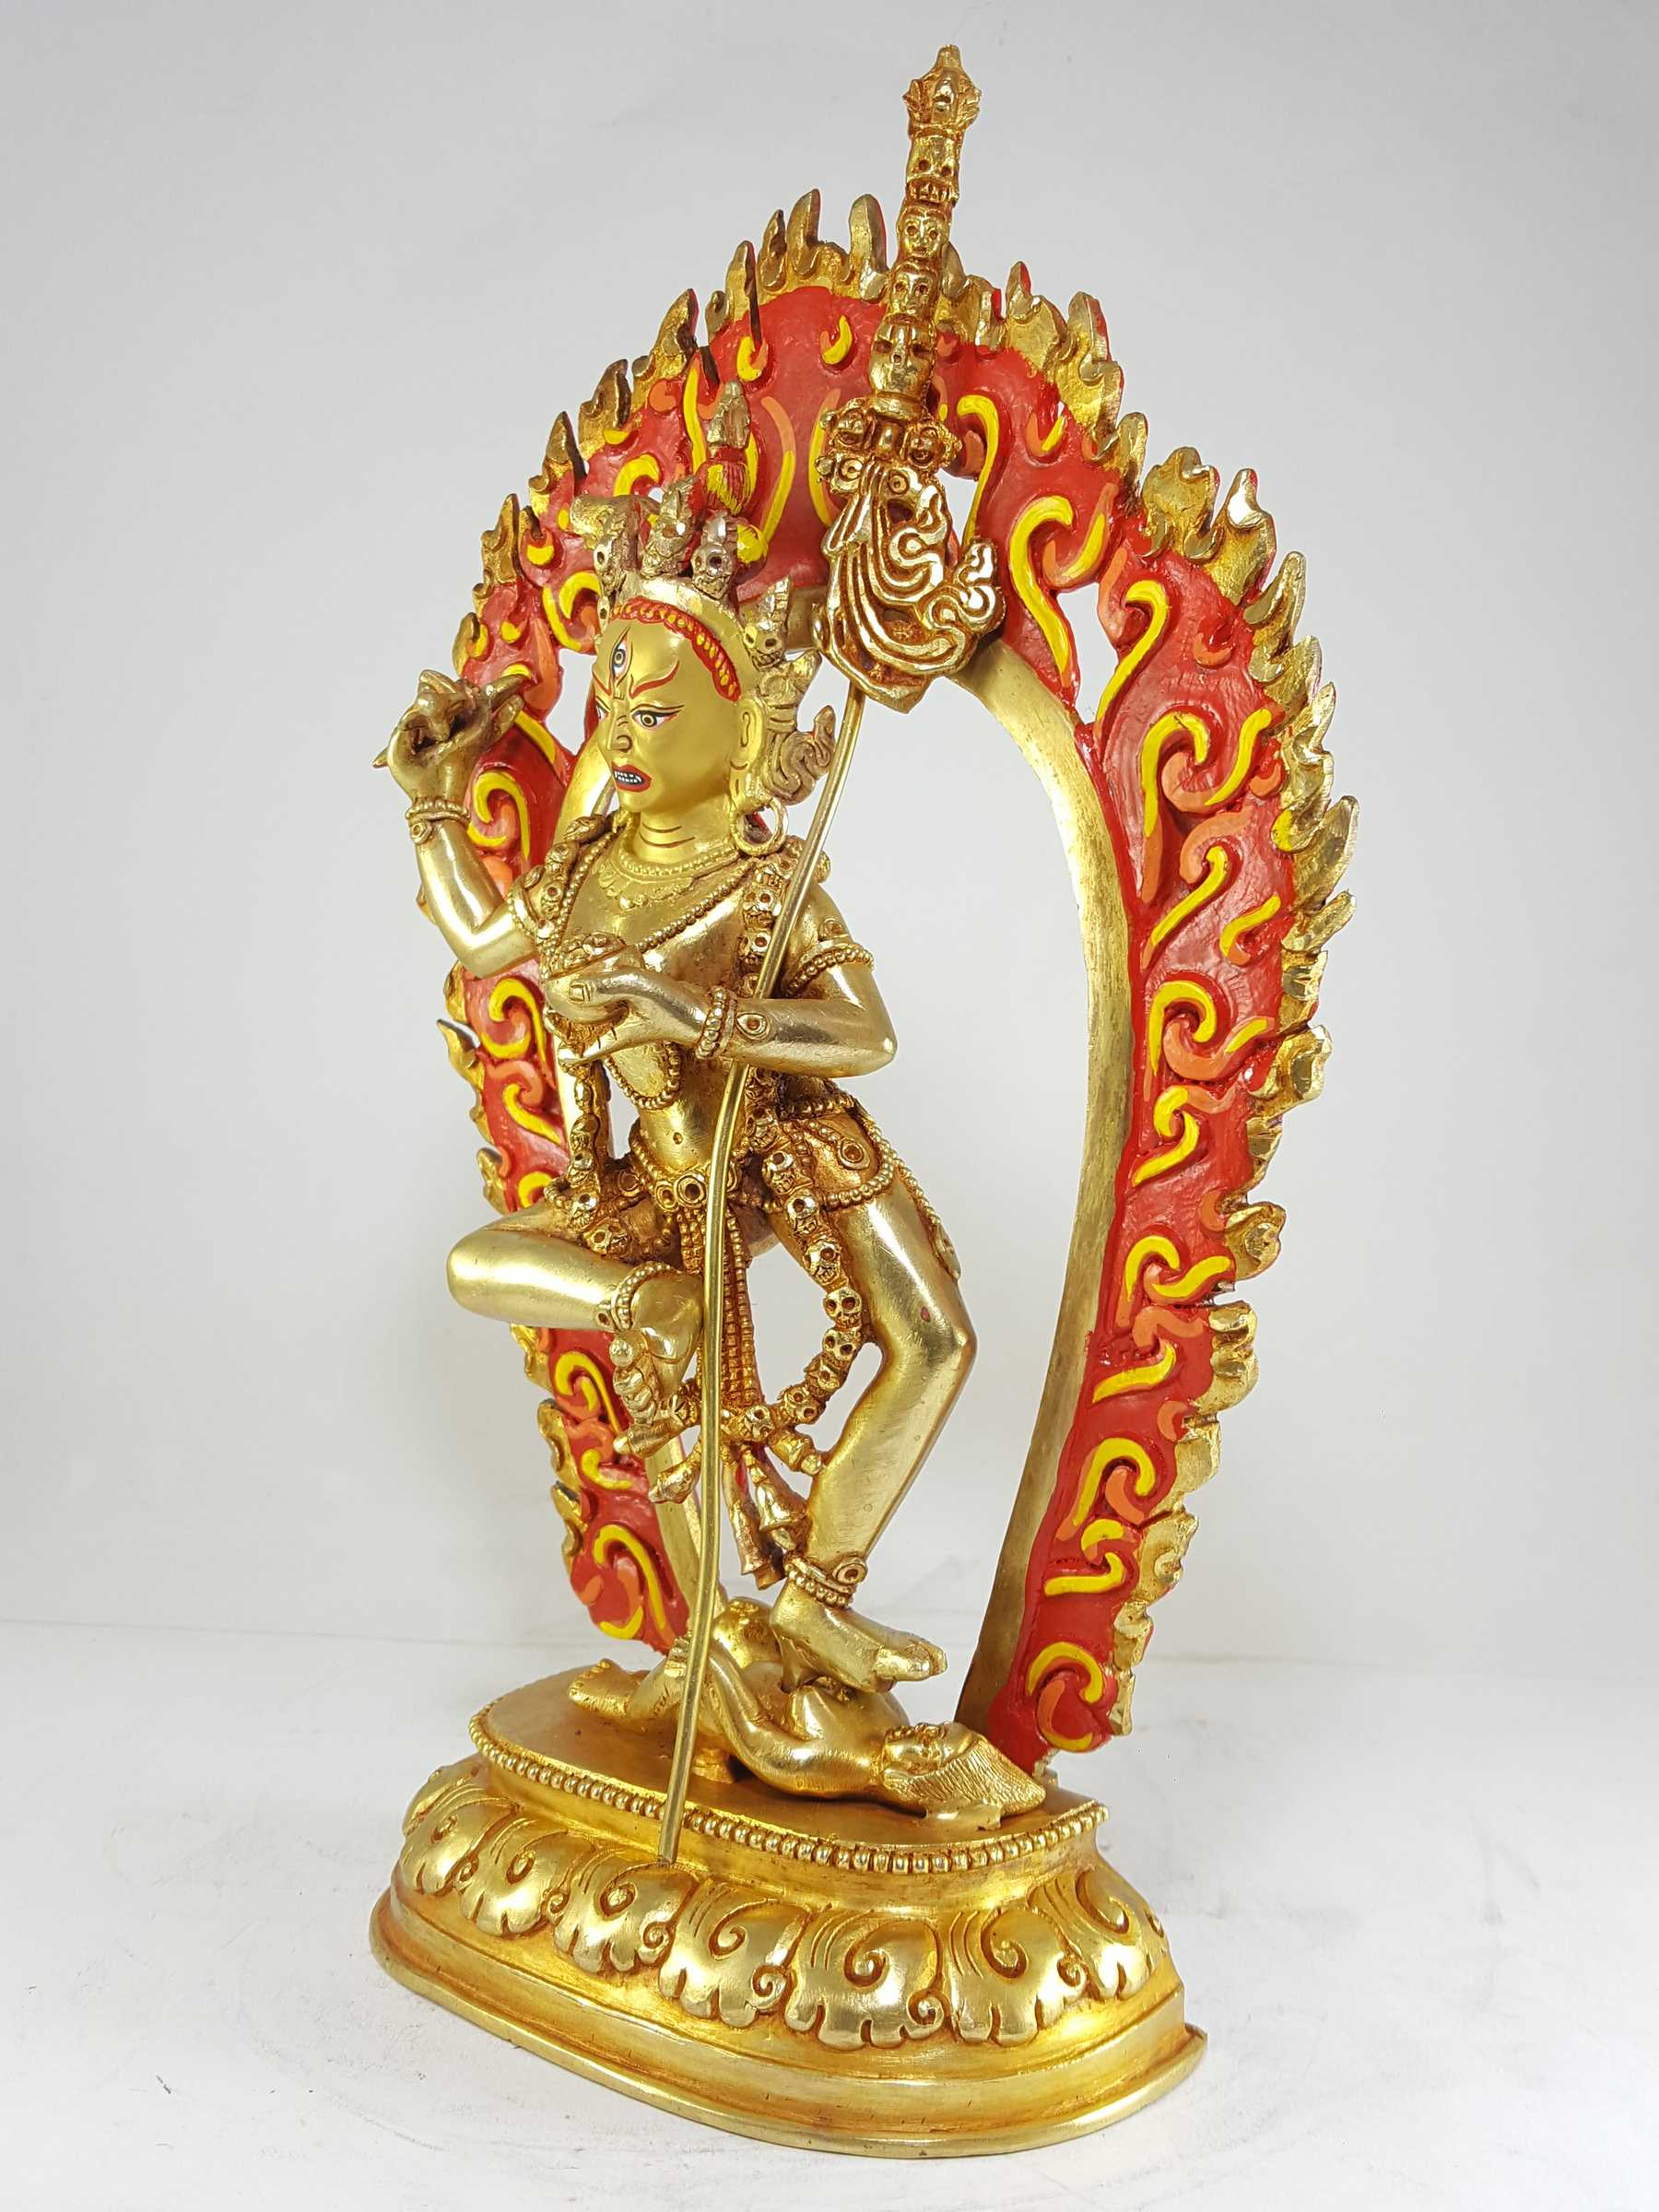 Statue Of Vajravarahi - Dorje Phagmo Yogini full Fire Gold Plated With painted Face